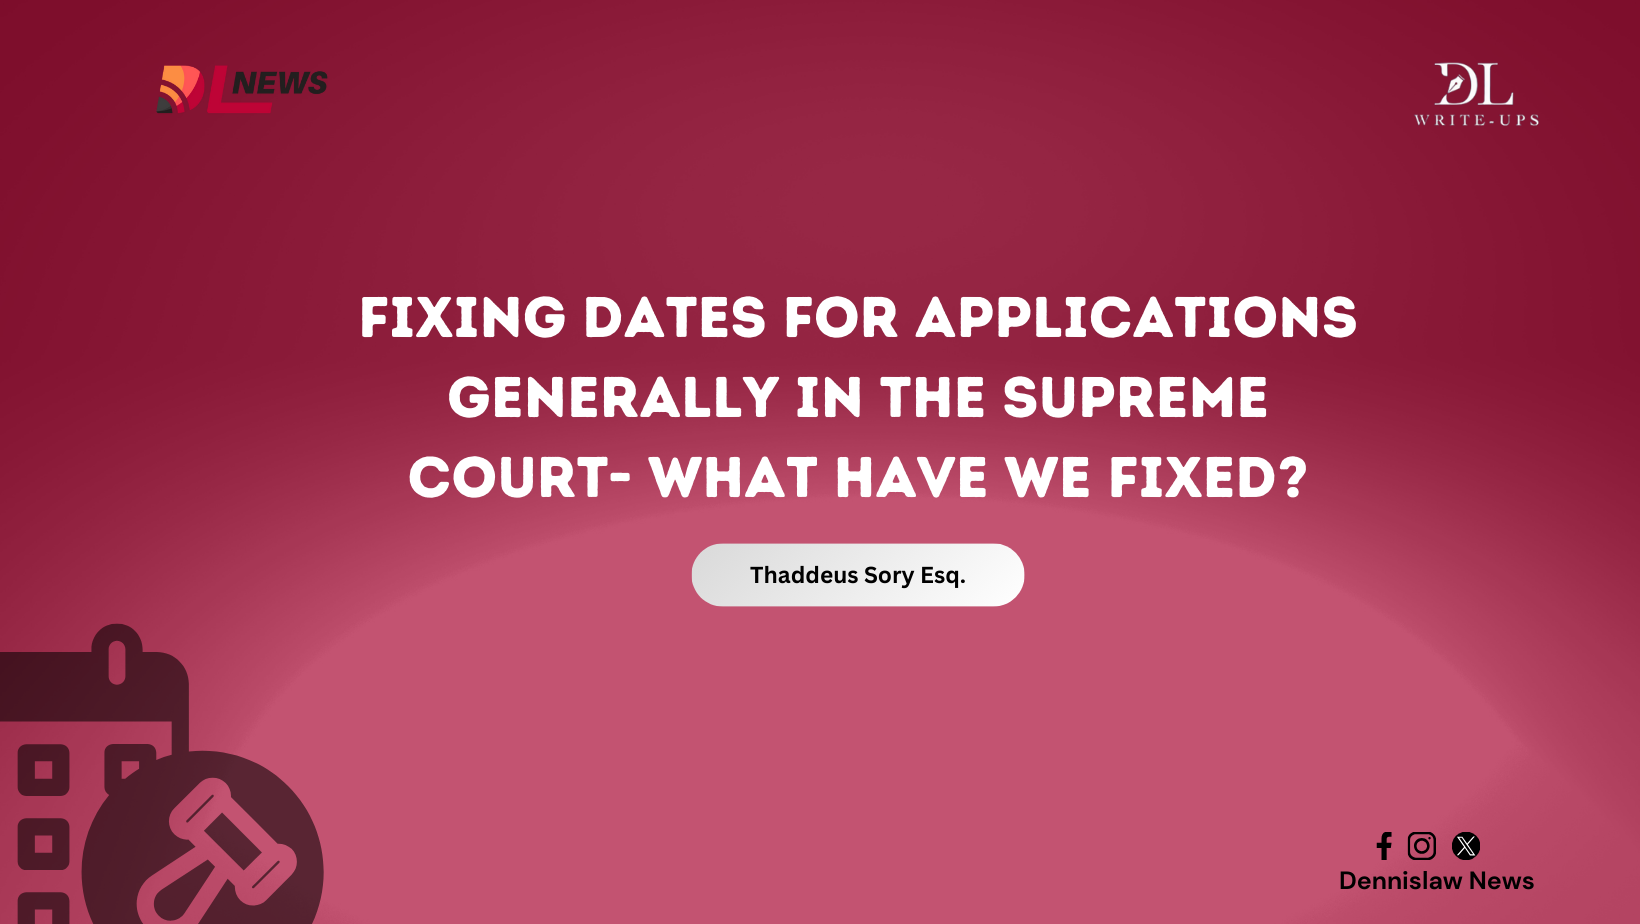 Fixing of dates for hearing applications (Generally) in the Supreme Court - What have we fixed?